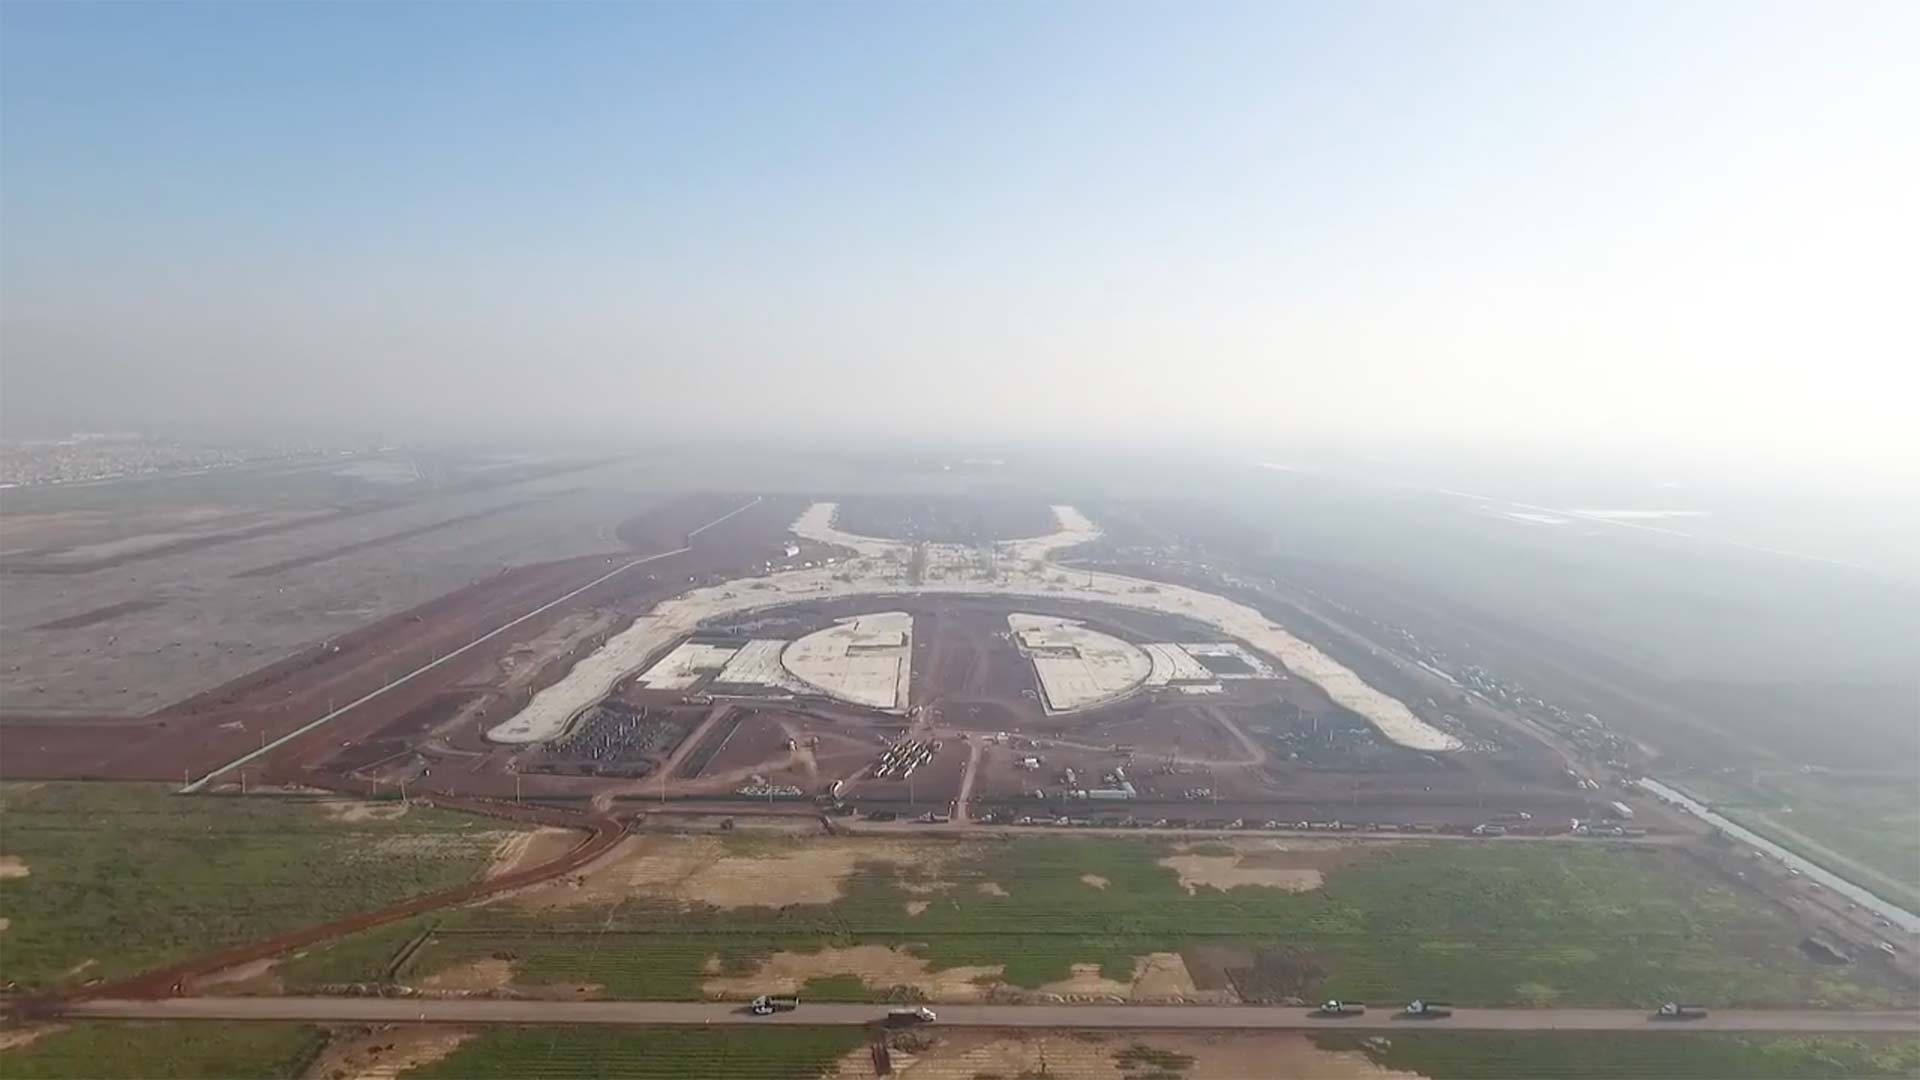 Screenshot of a promotional video showing construction on the new international airport in Mexico City, from the airport [website](http://www.aeropuerto.gob.mx/).